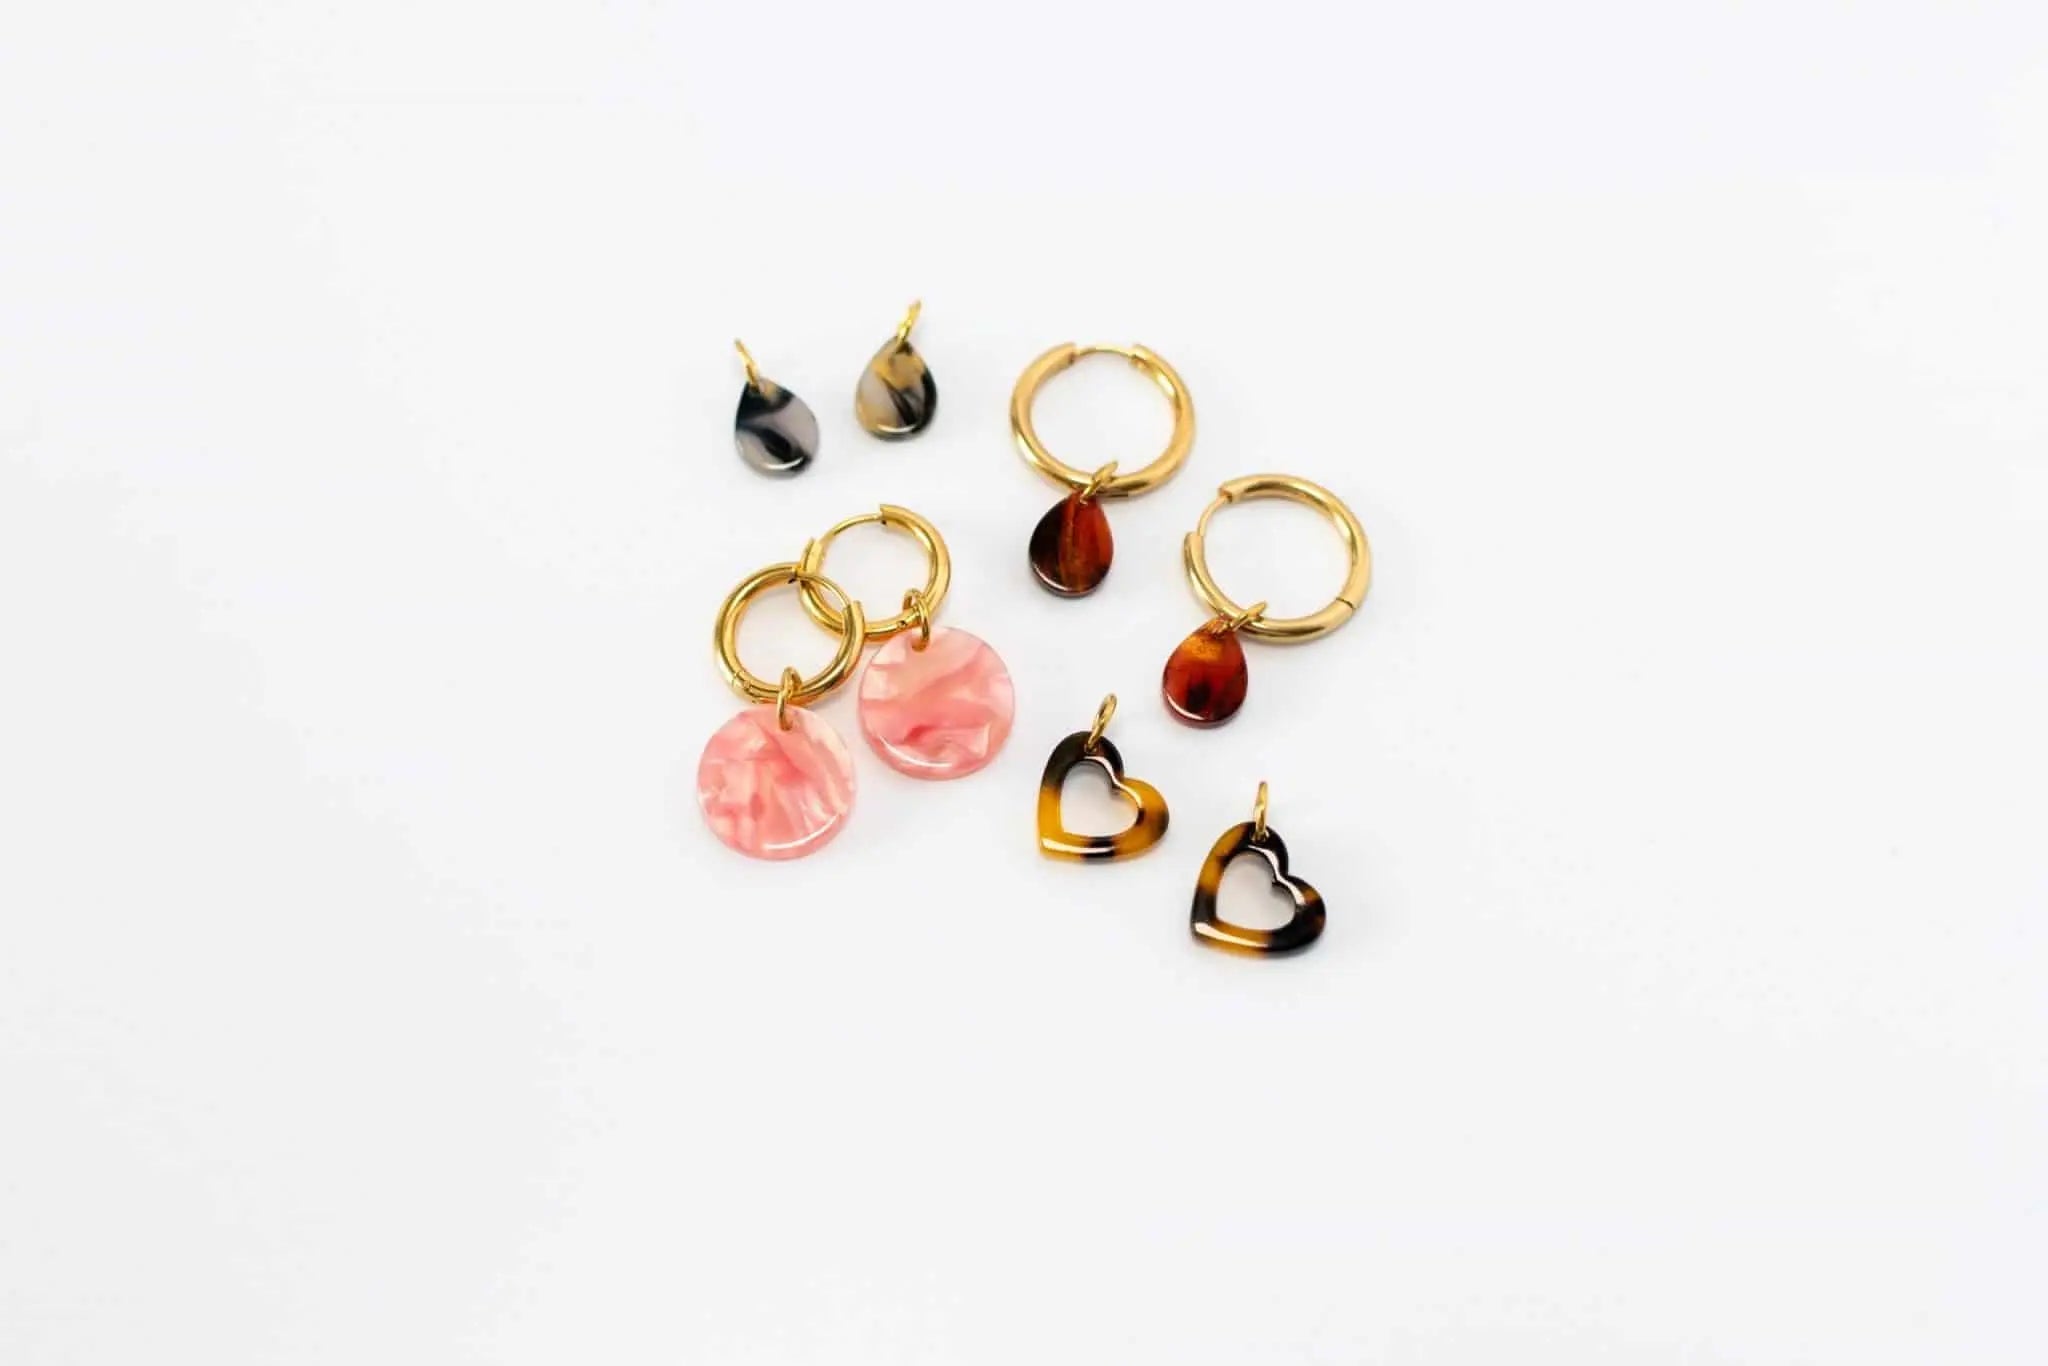 How to Rock the Mismatched Earring Trend | Jewelry Guide